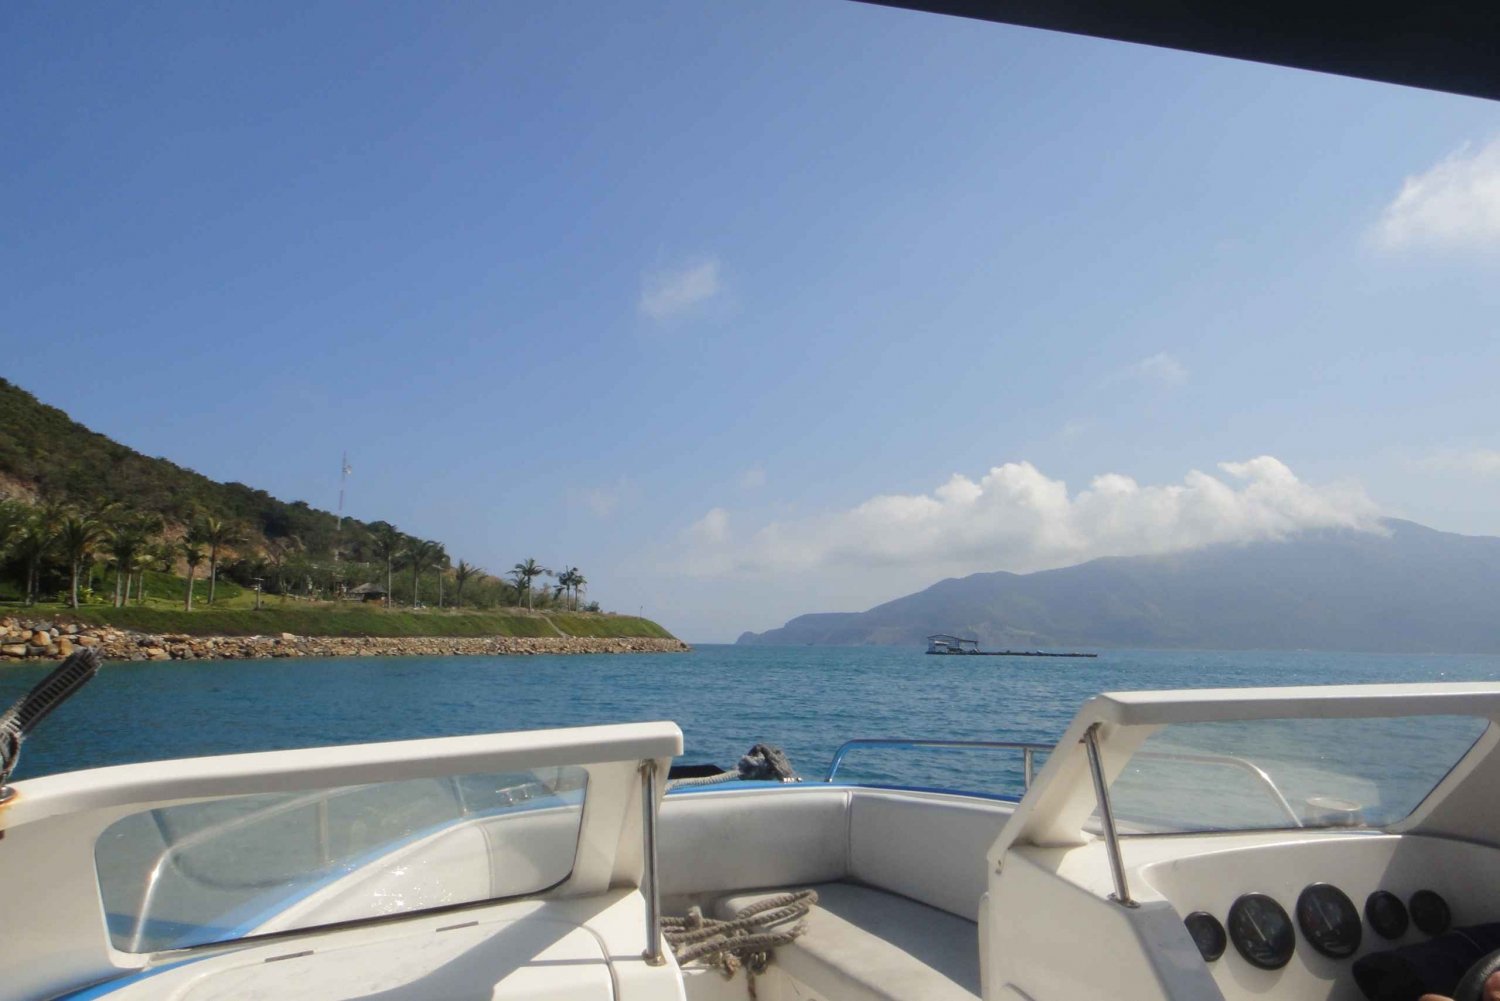 From Nha Trang: Full-day Island Tour